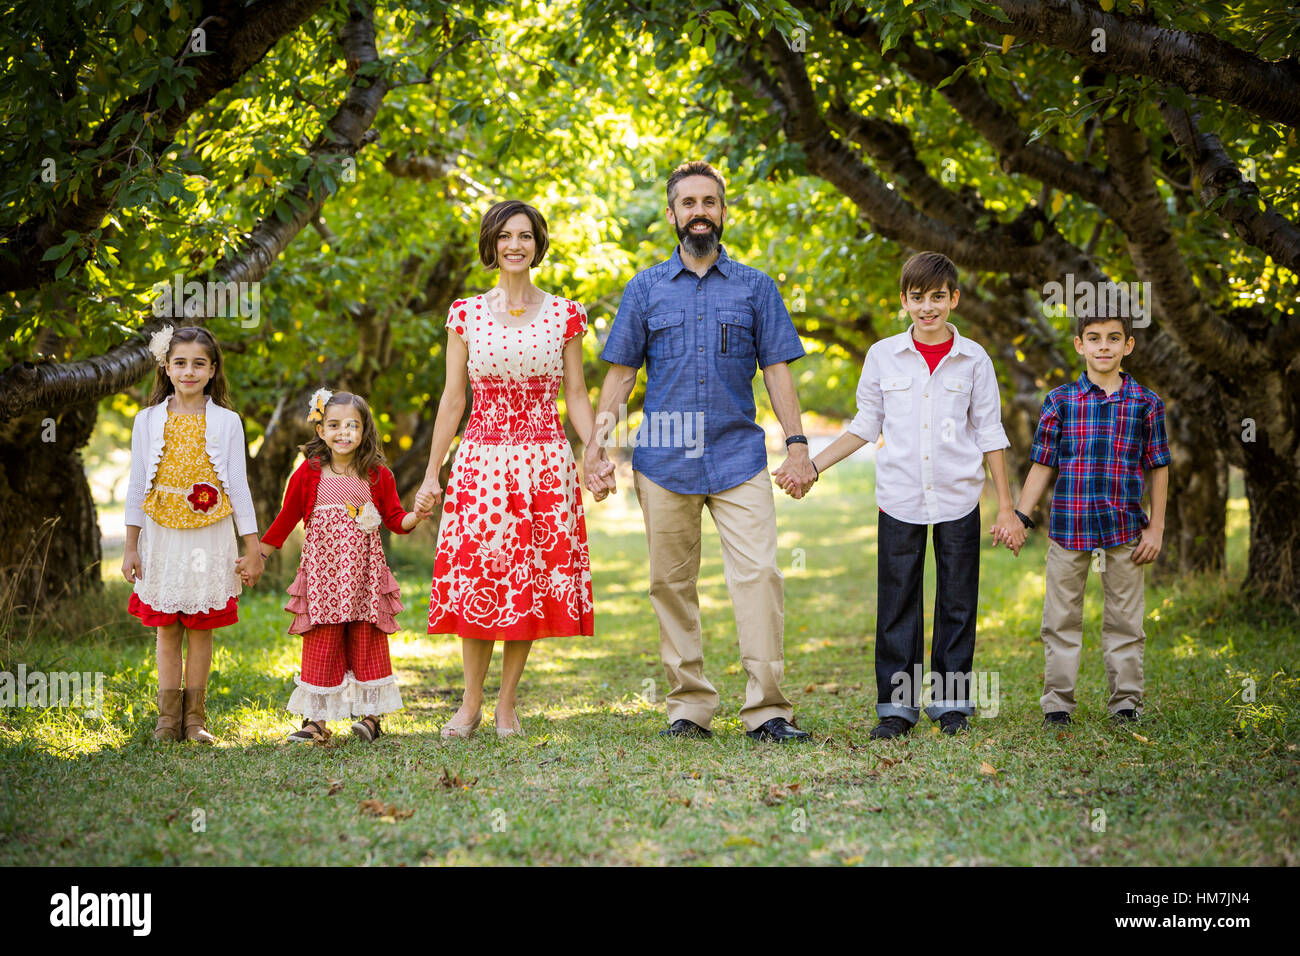 Family standing, holding hands Stock Photo